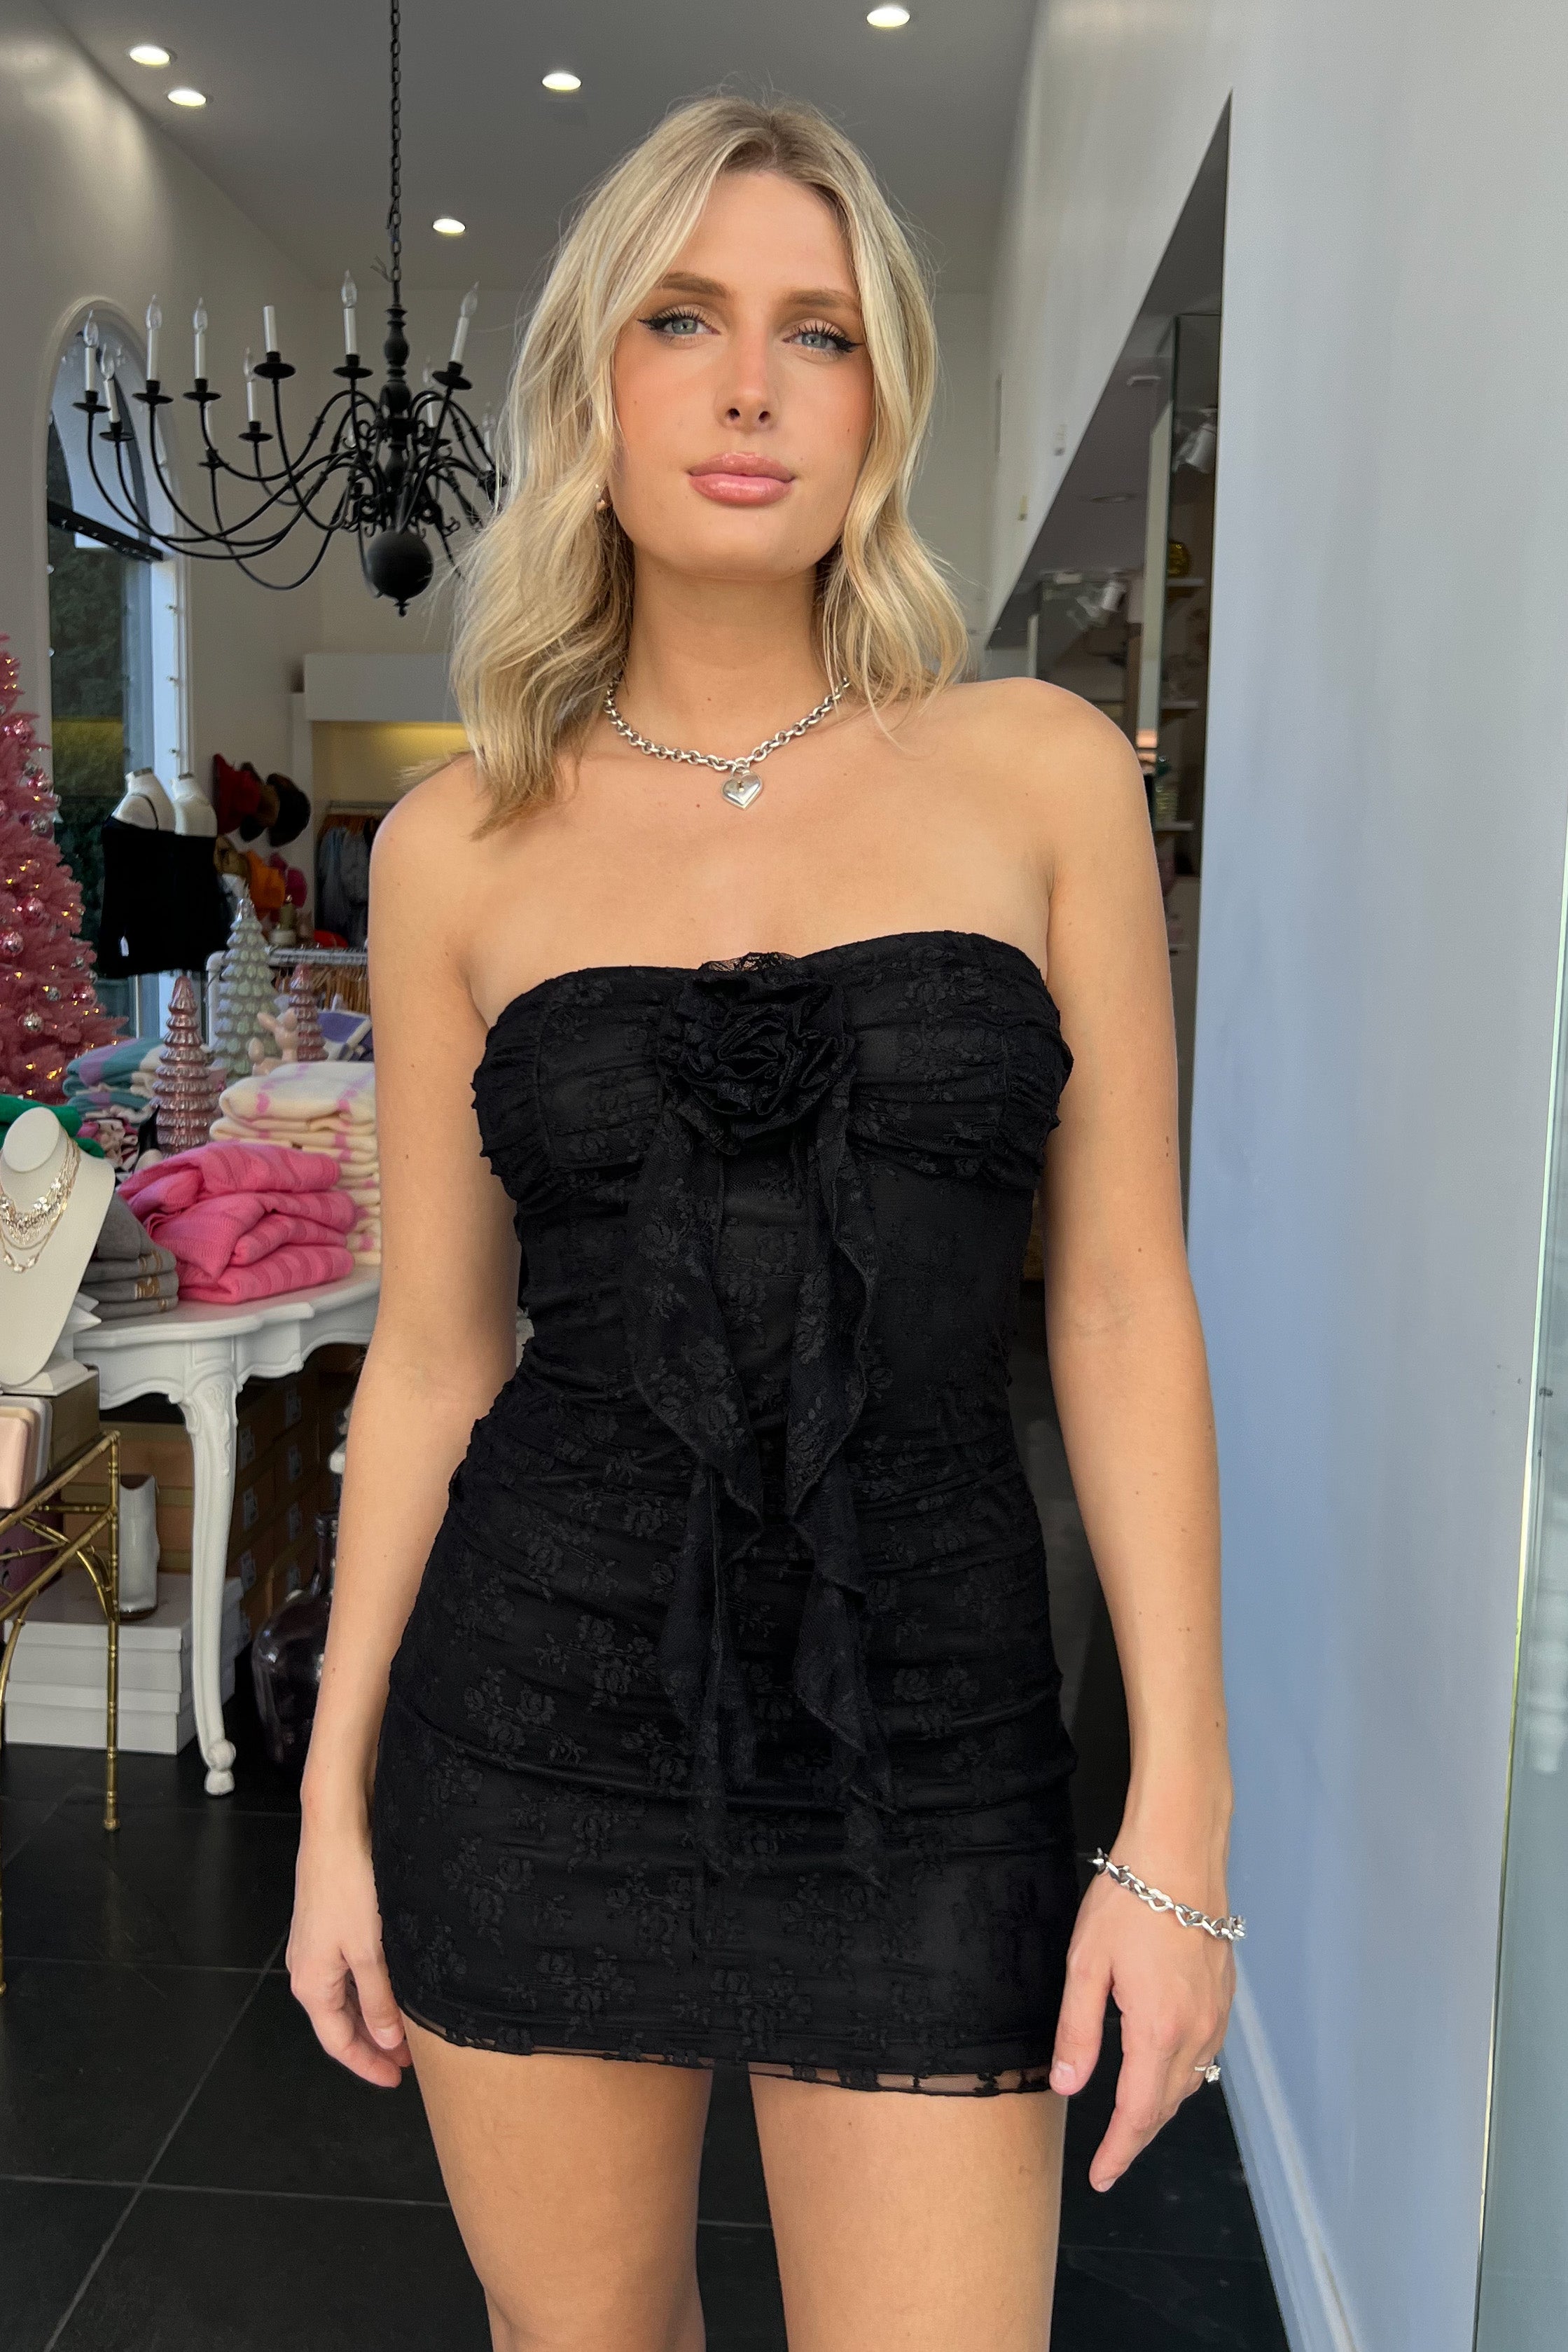 Kiss From A Rose Dress-Black